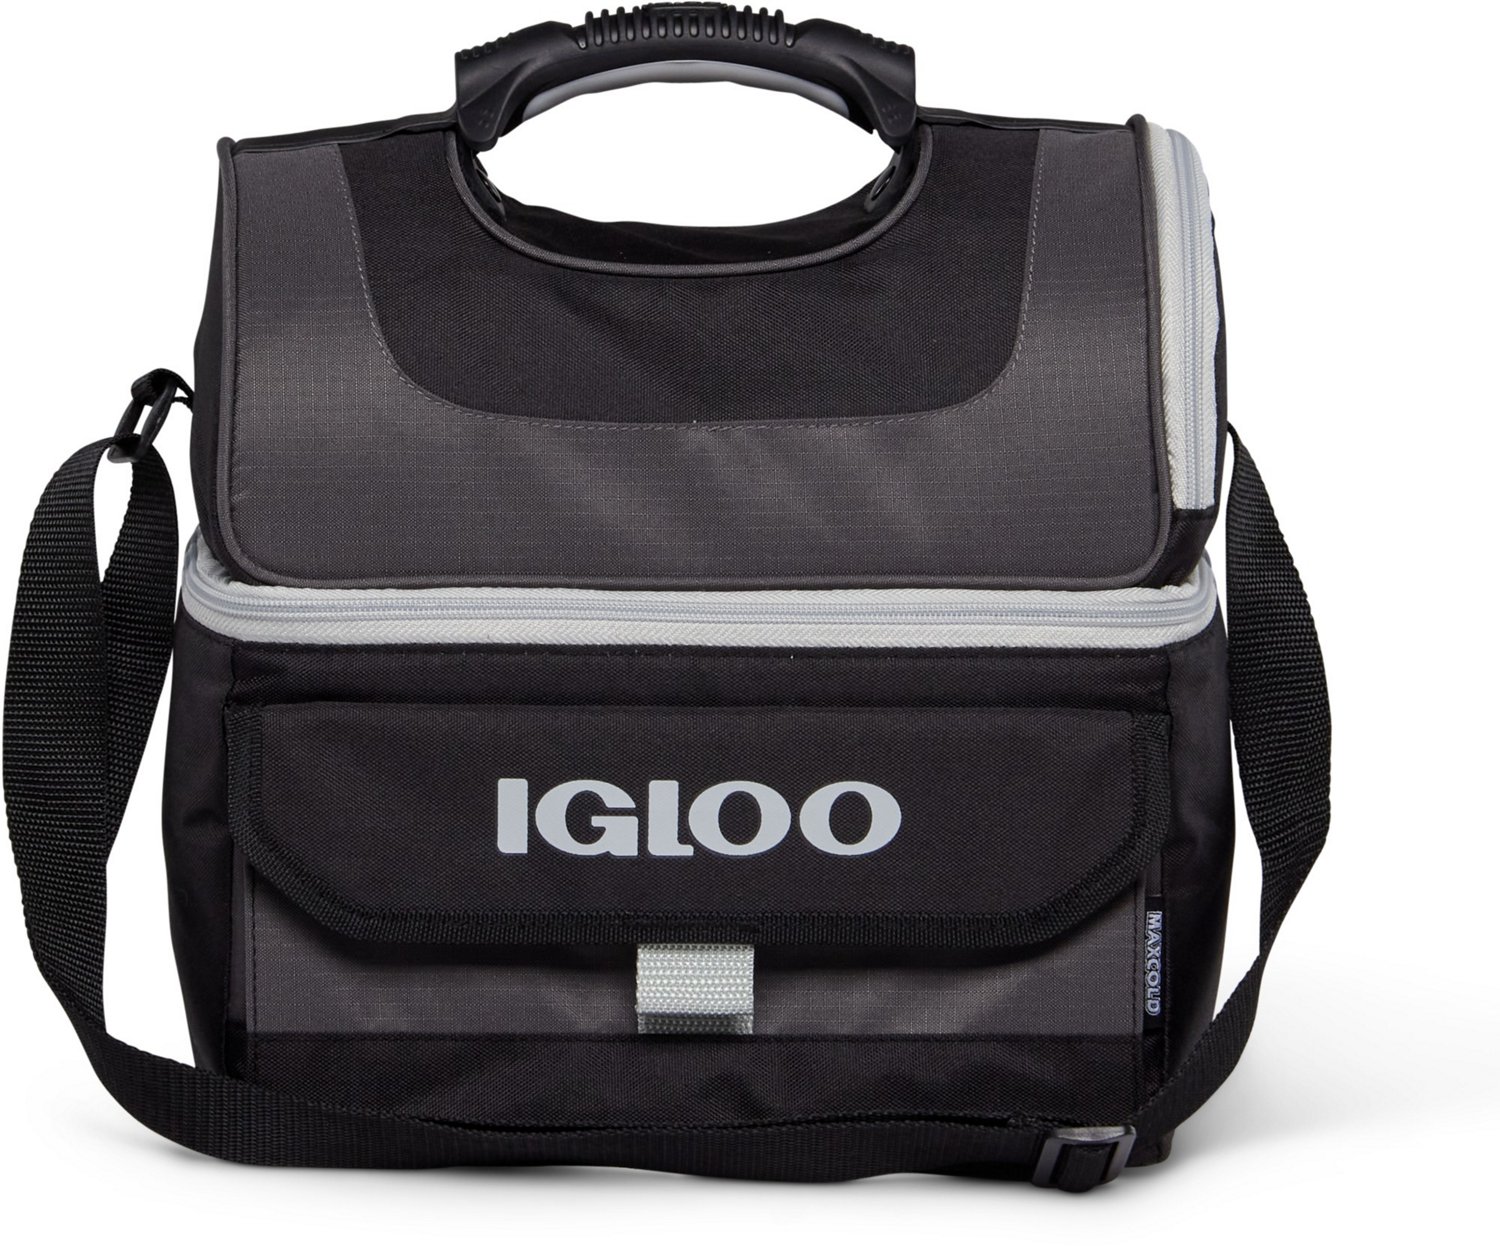 Igloo Playmate Gripper 16-Can Cooler